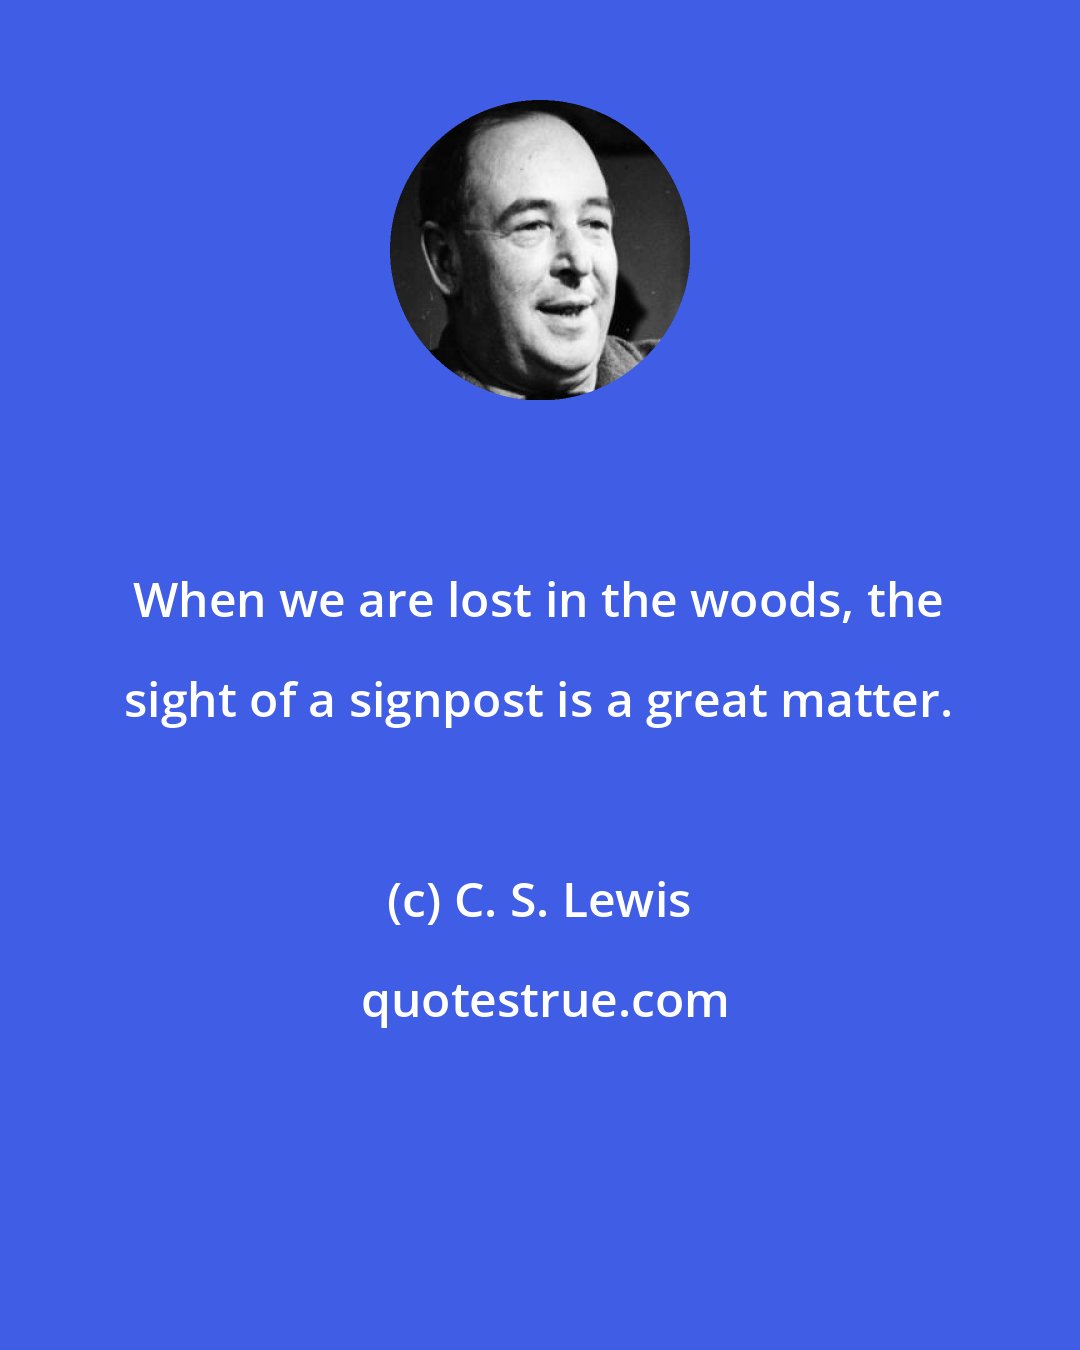 C. S. Lewis: When we are lost in the woods, the sight of a signpost is a great matter.